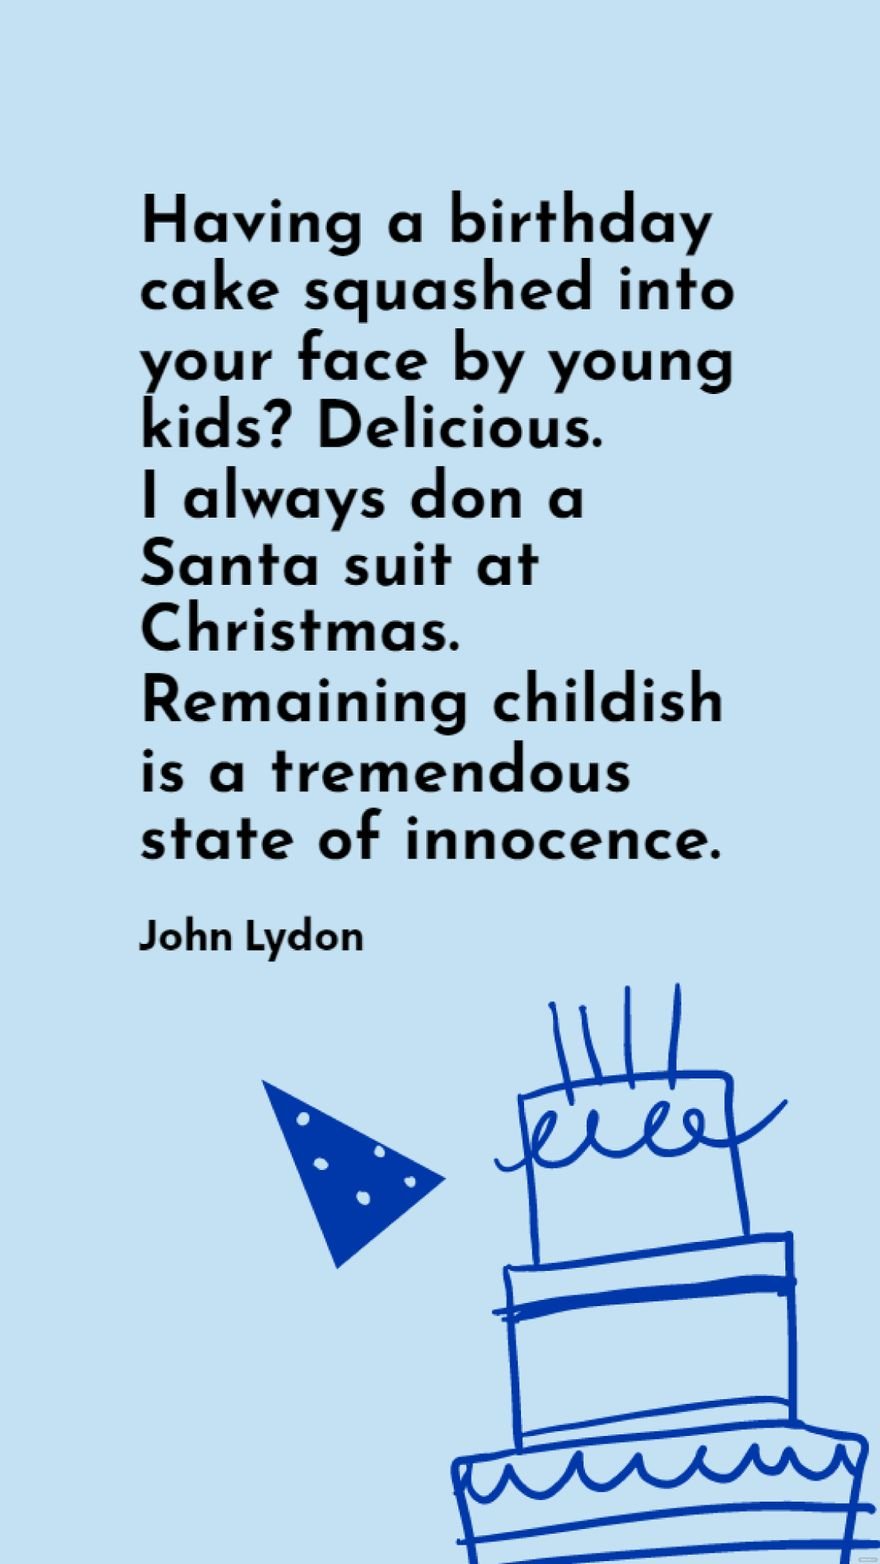 John Lydon - Having a birthday cake squashed into your face by young kids? Delicious. I always don a Santa suit at Christmas. Remaining childish is a tremendous state of innocence.